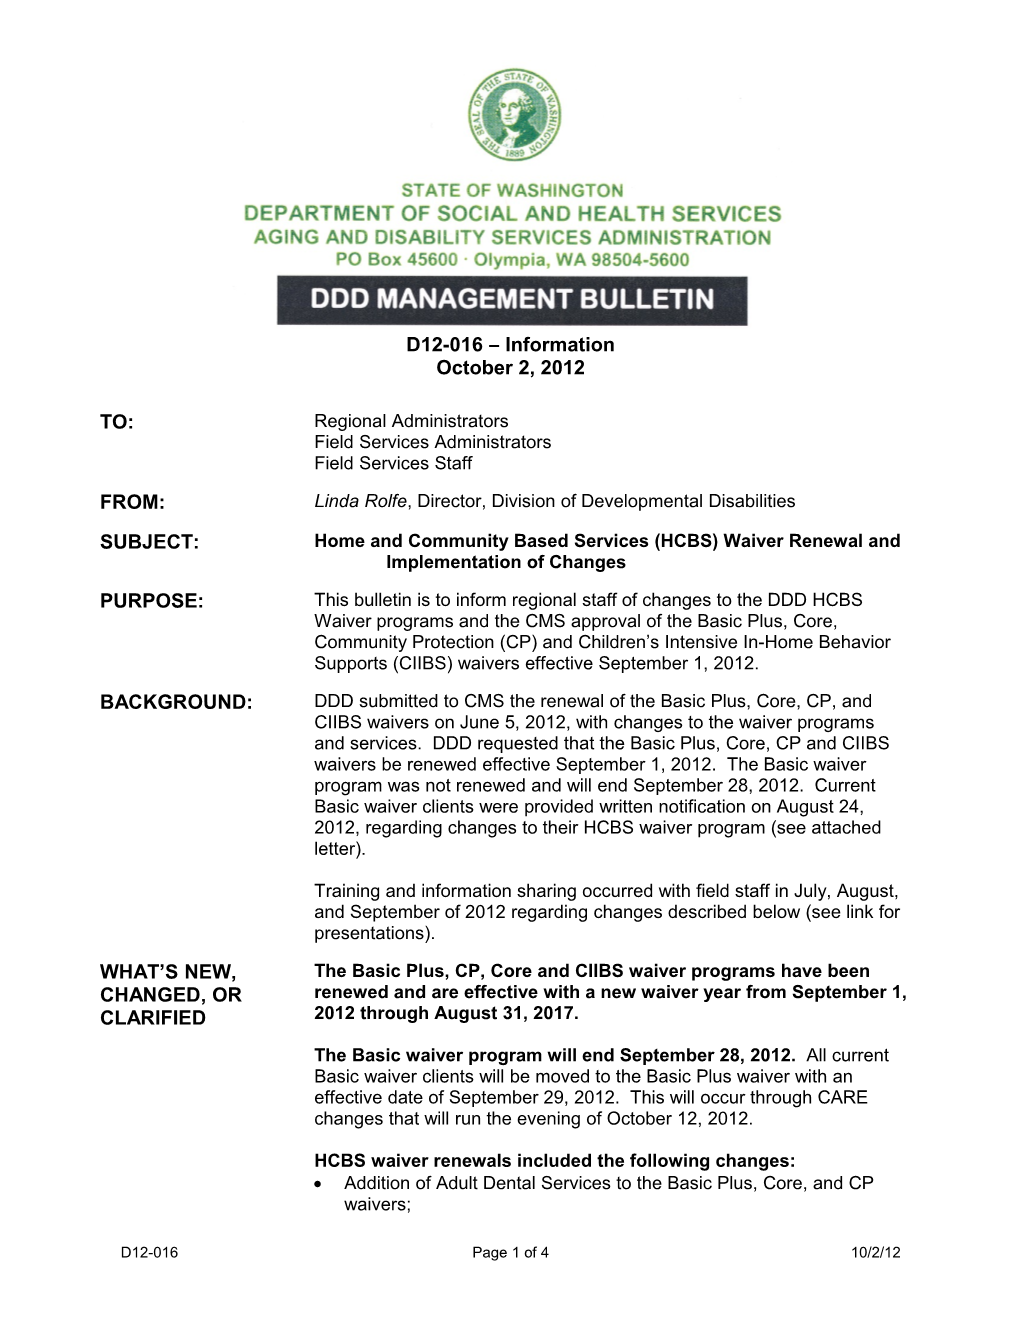 Home and Community Based Services (HCBS) Waiver Renewal and Implementation of Changes